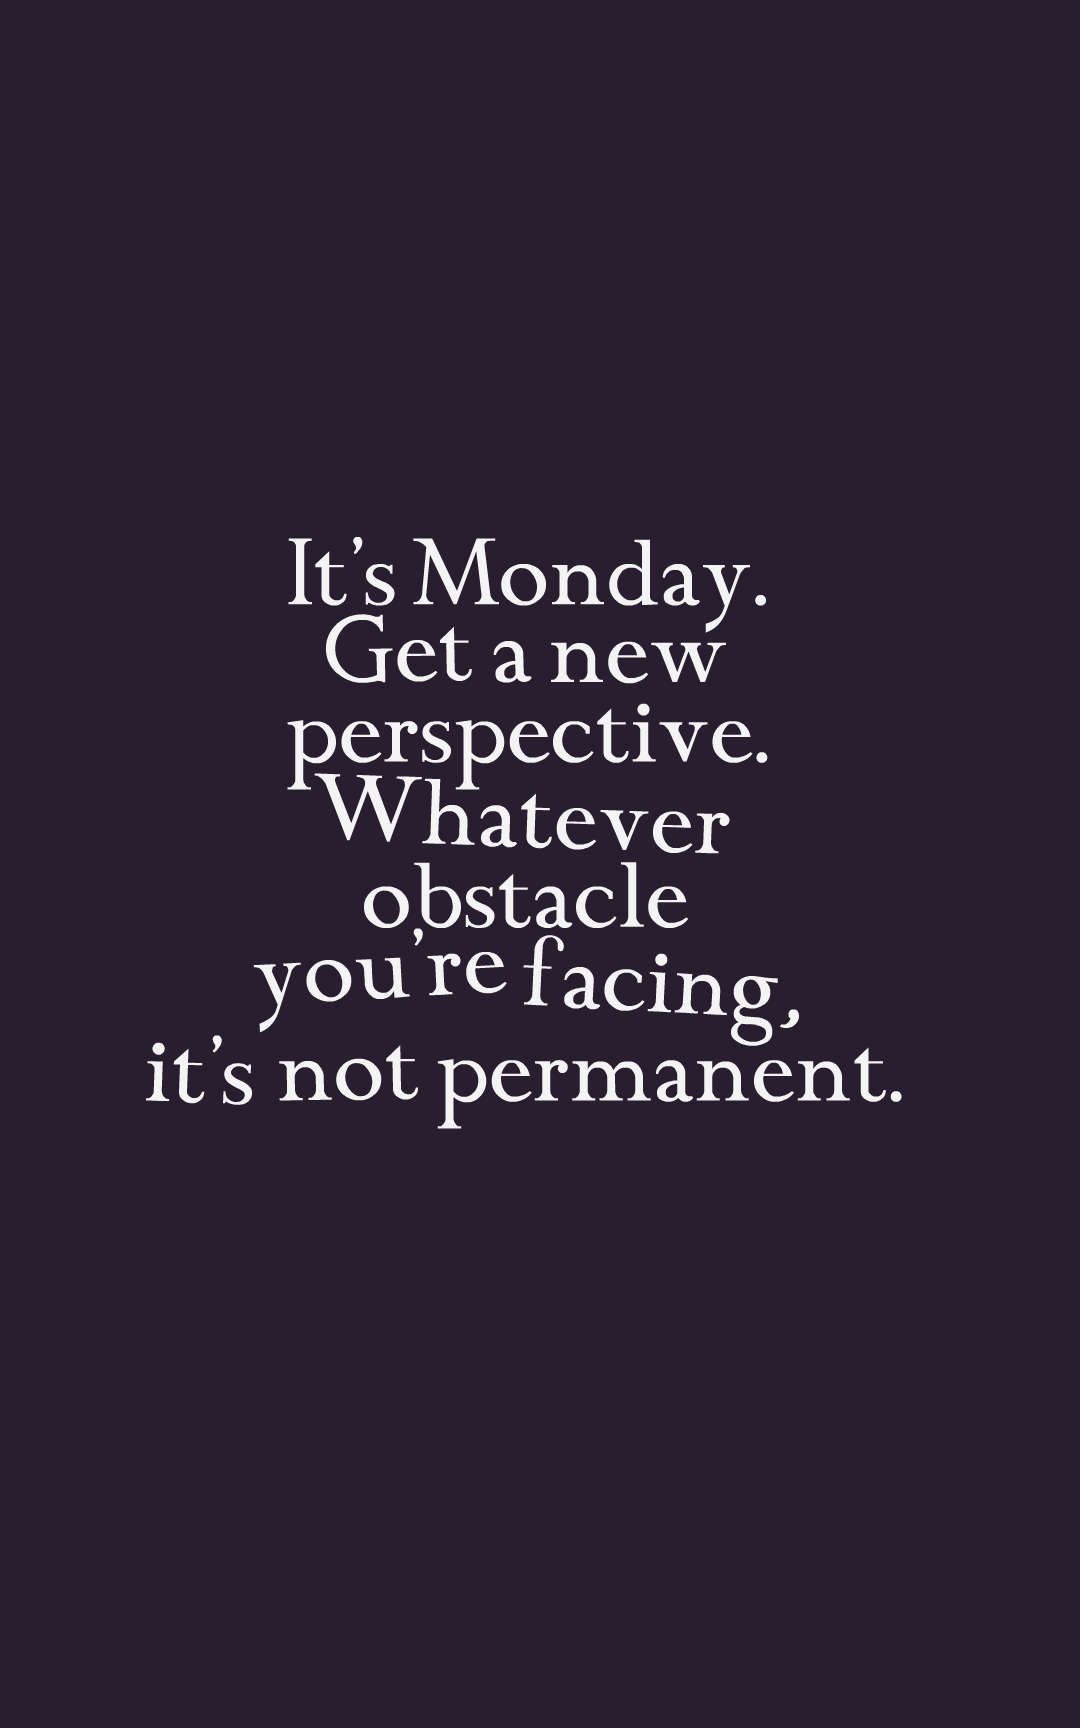 It’s Monday. Get a new perspective. Whatever obstacle you’re facing, it’s not permanent.